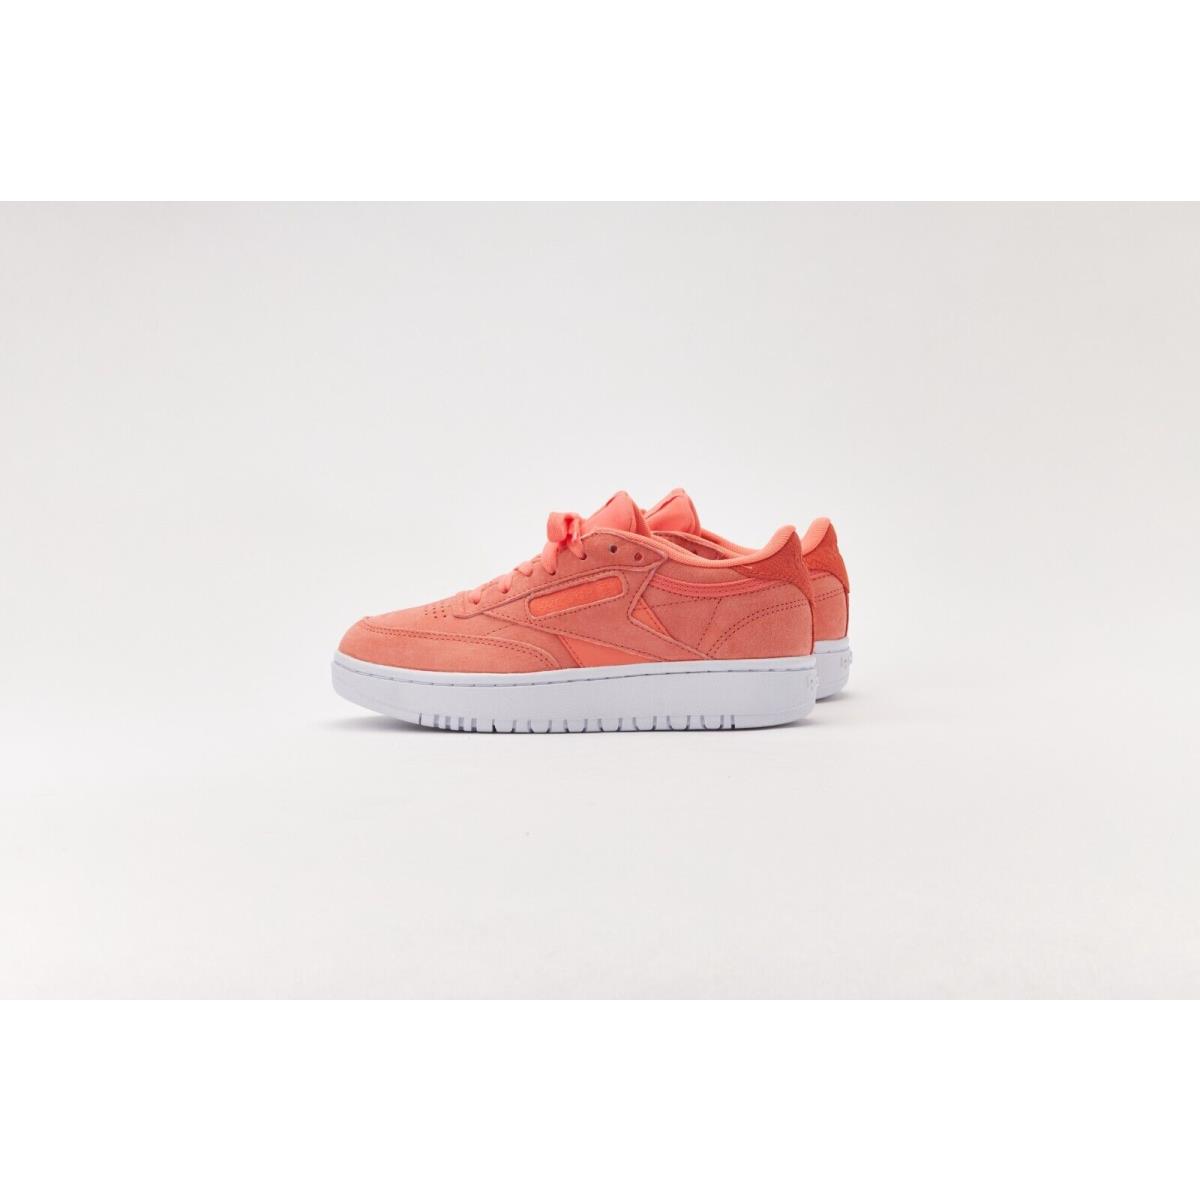 Reebok shoes Club Double - Twisted Coral/White 11